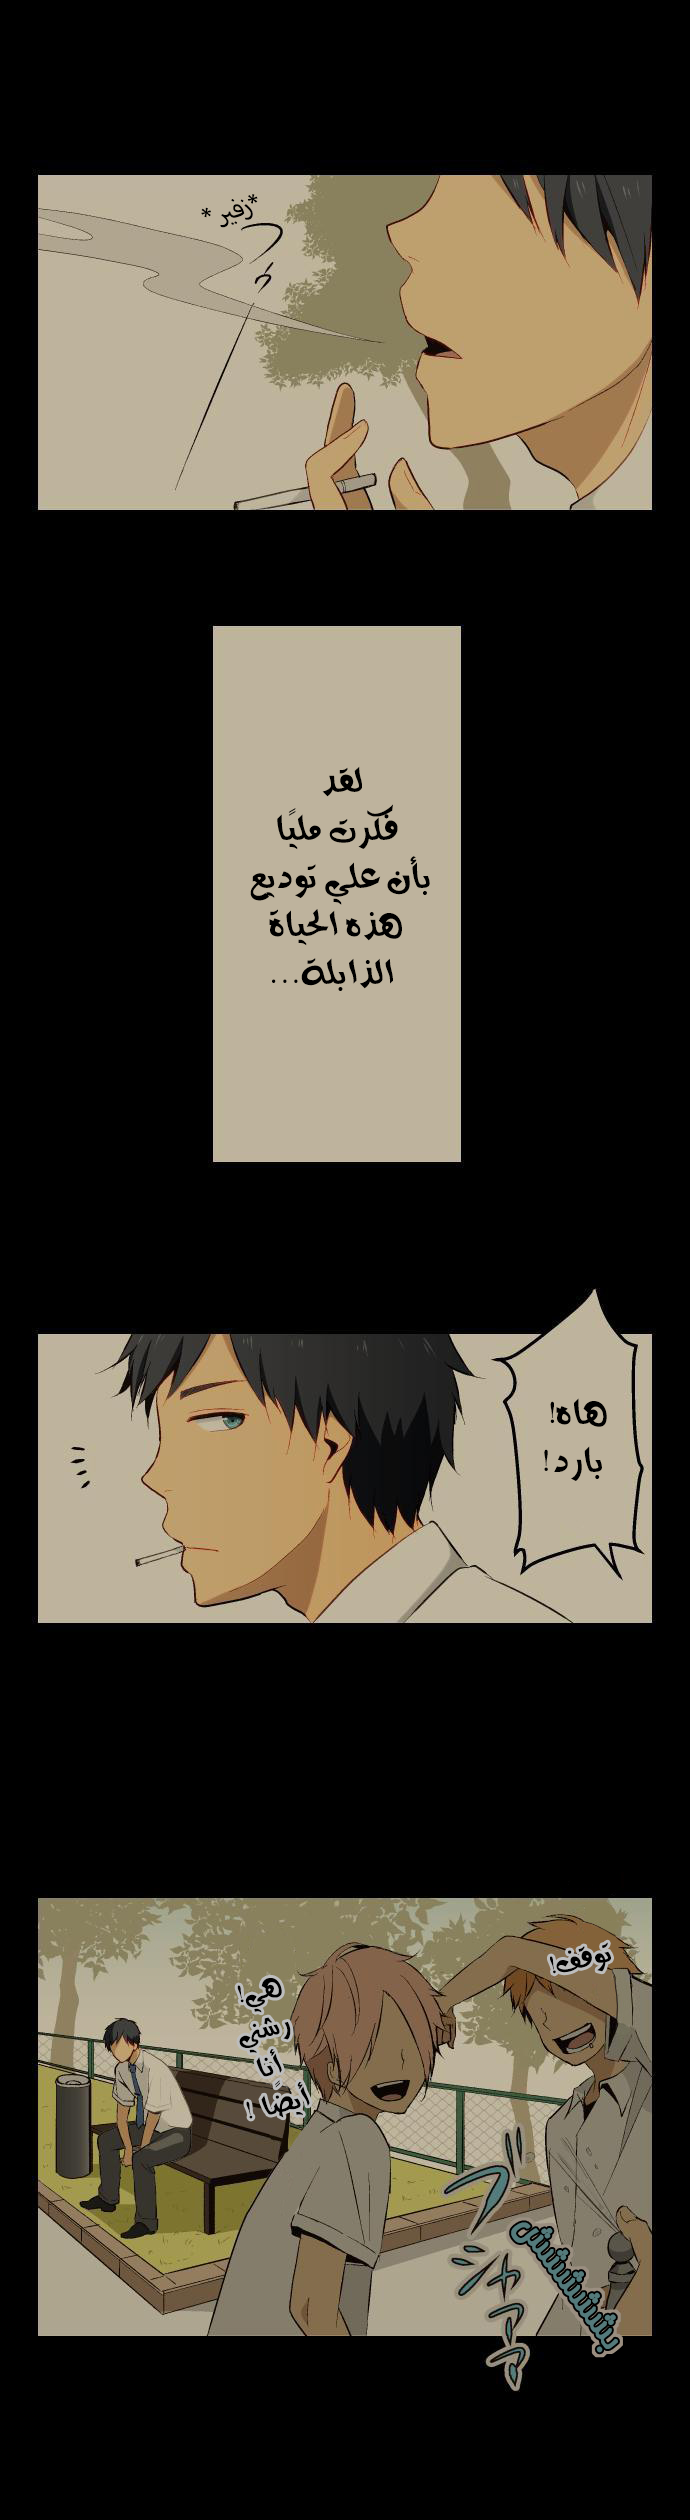 ReLIFE: Chapter 6 - Page 1